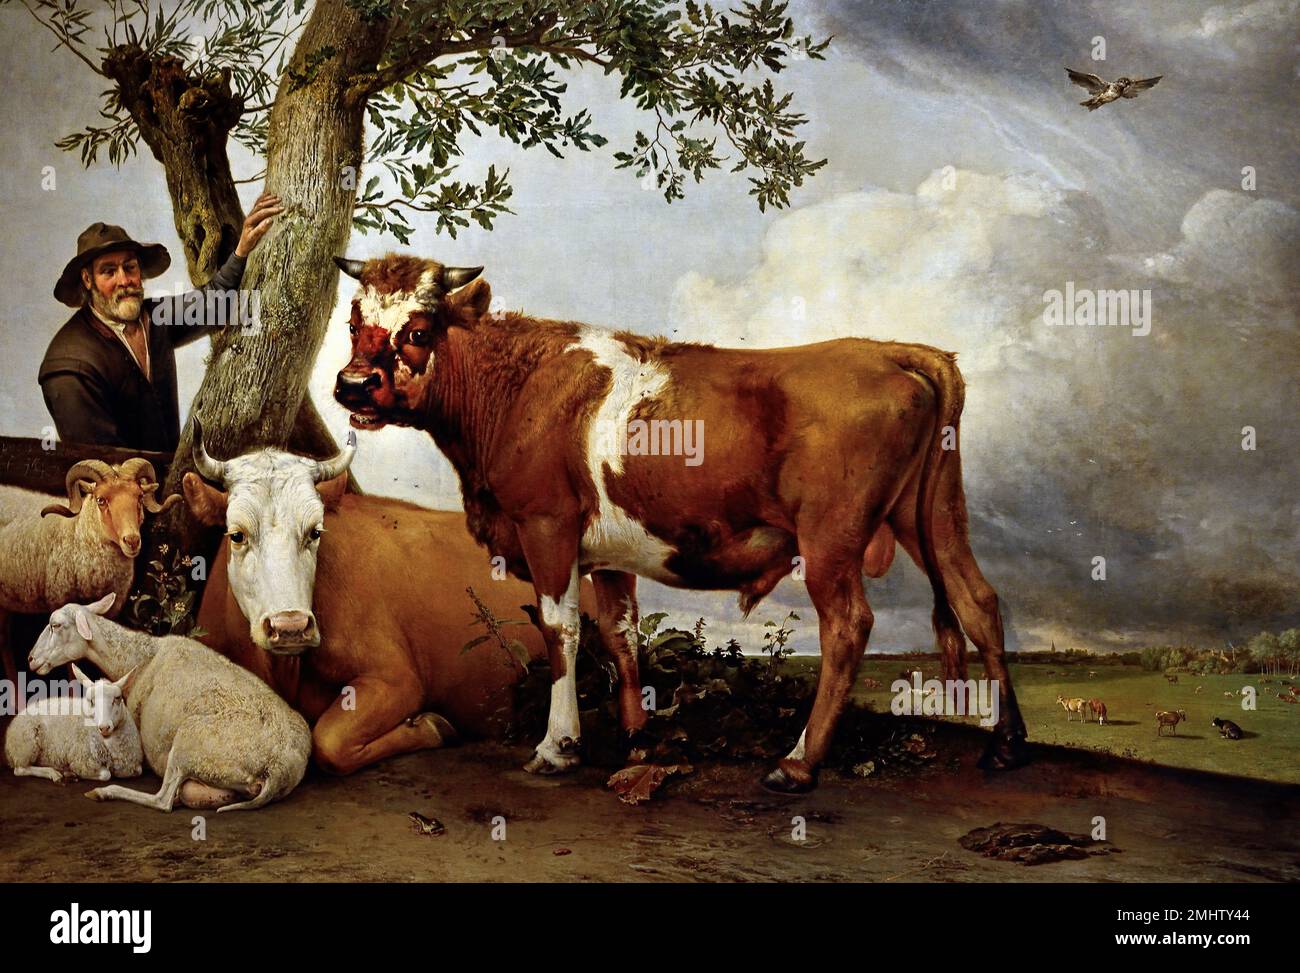 Paulus Potter The bull (ca. 1647)  Paulus Potter 1625 - 1654  Dutch painter specializing in animals and landscapes The Netherlands. Stock Photo